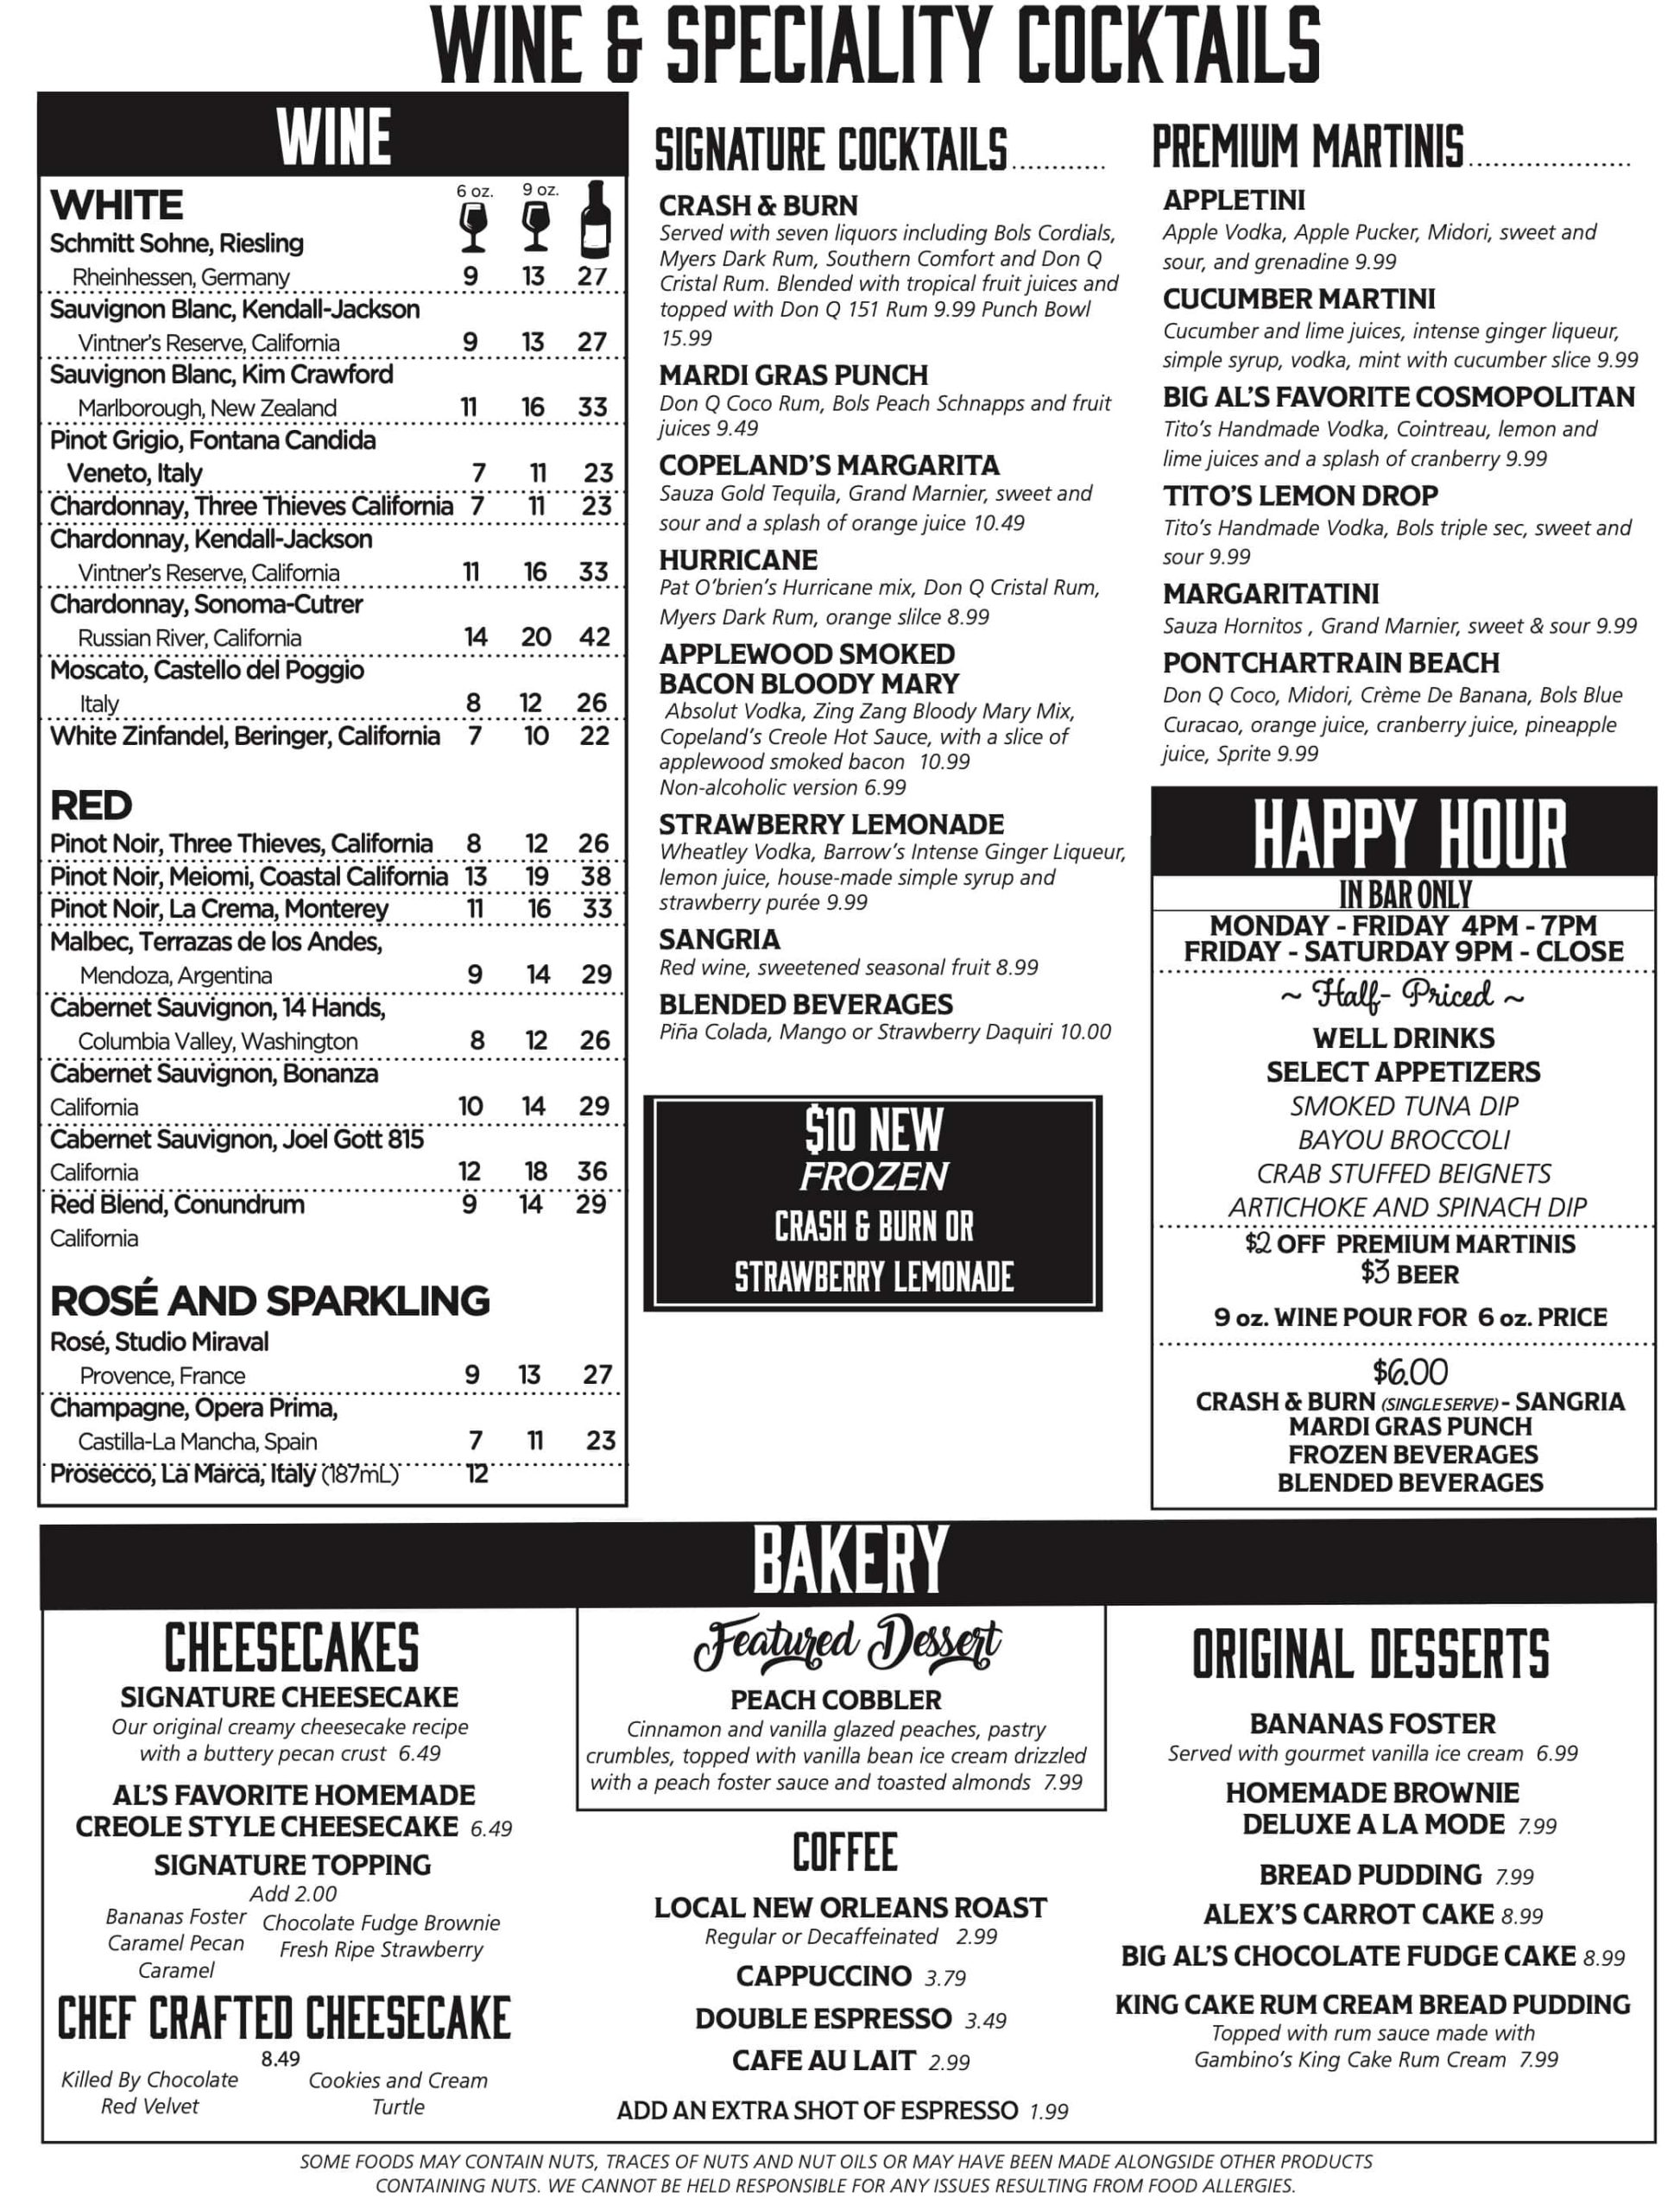 Copeland's of New Orleans Drinks and Bakery Menu